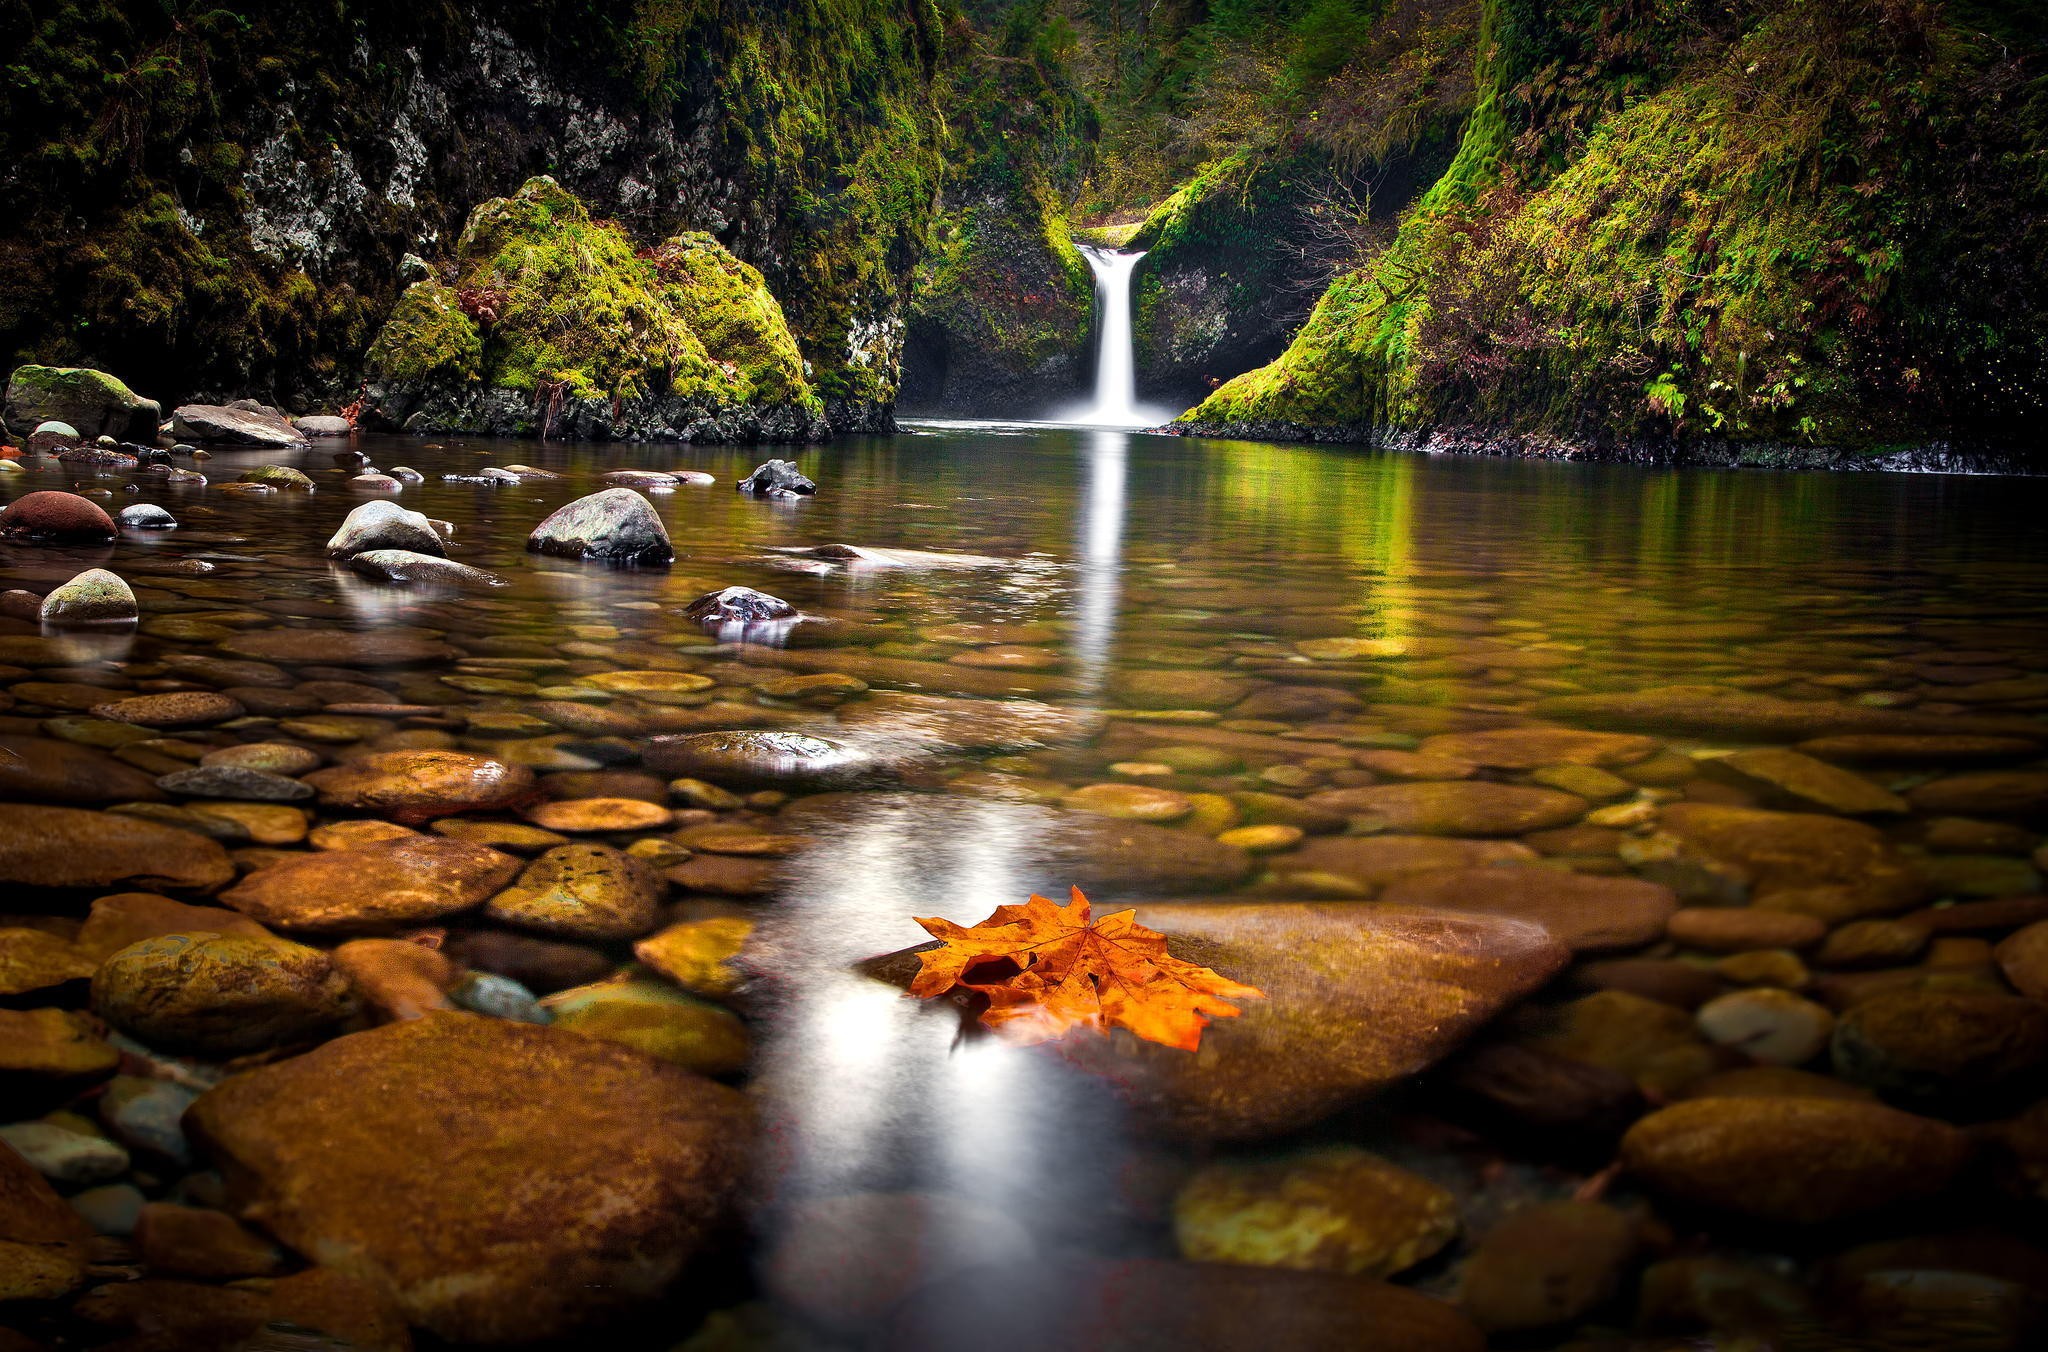 General 2048x1352 waterfall nature landscape